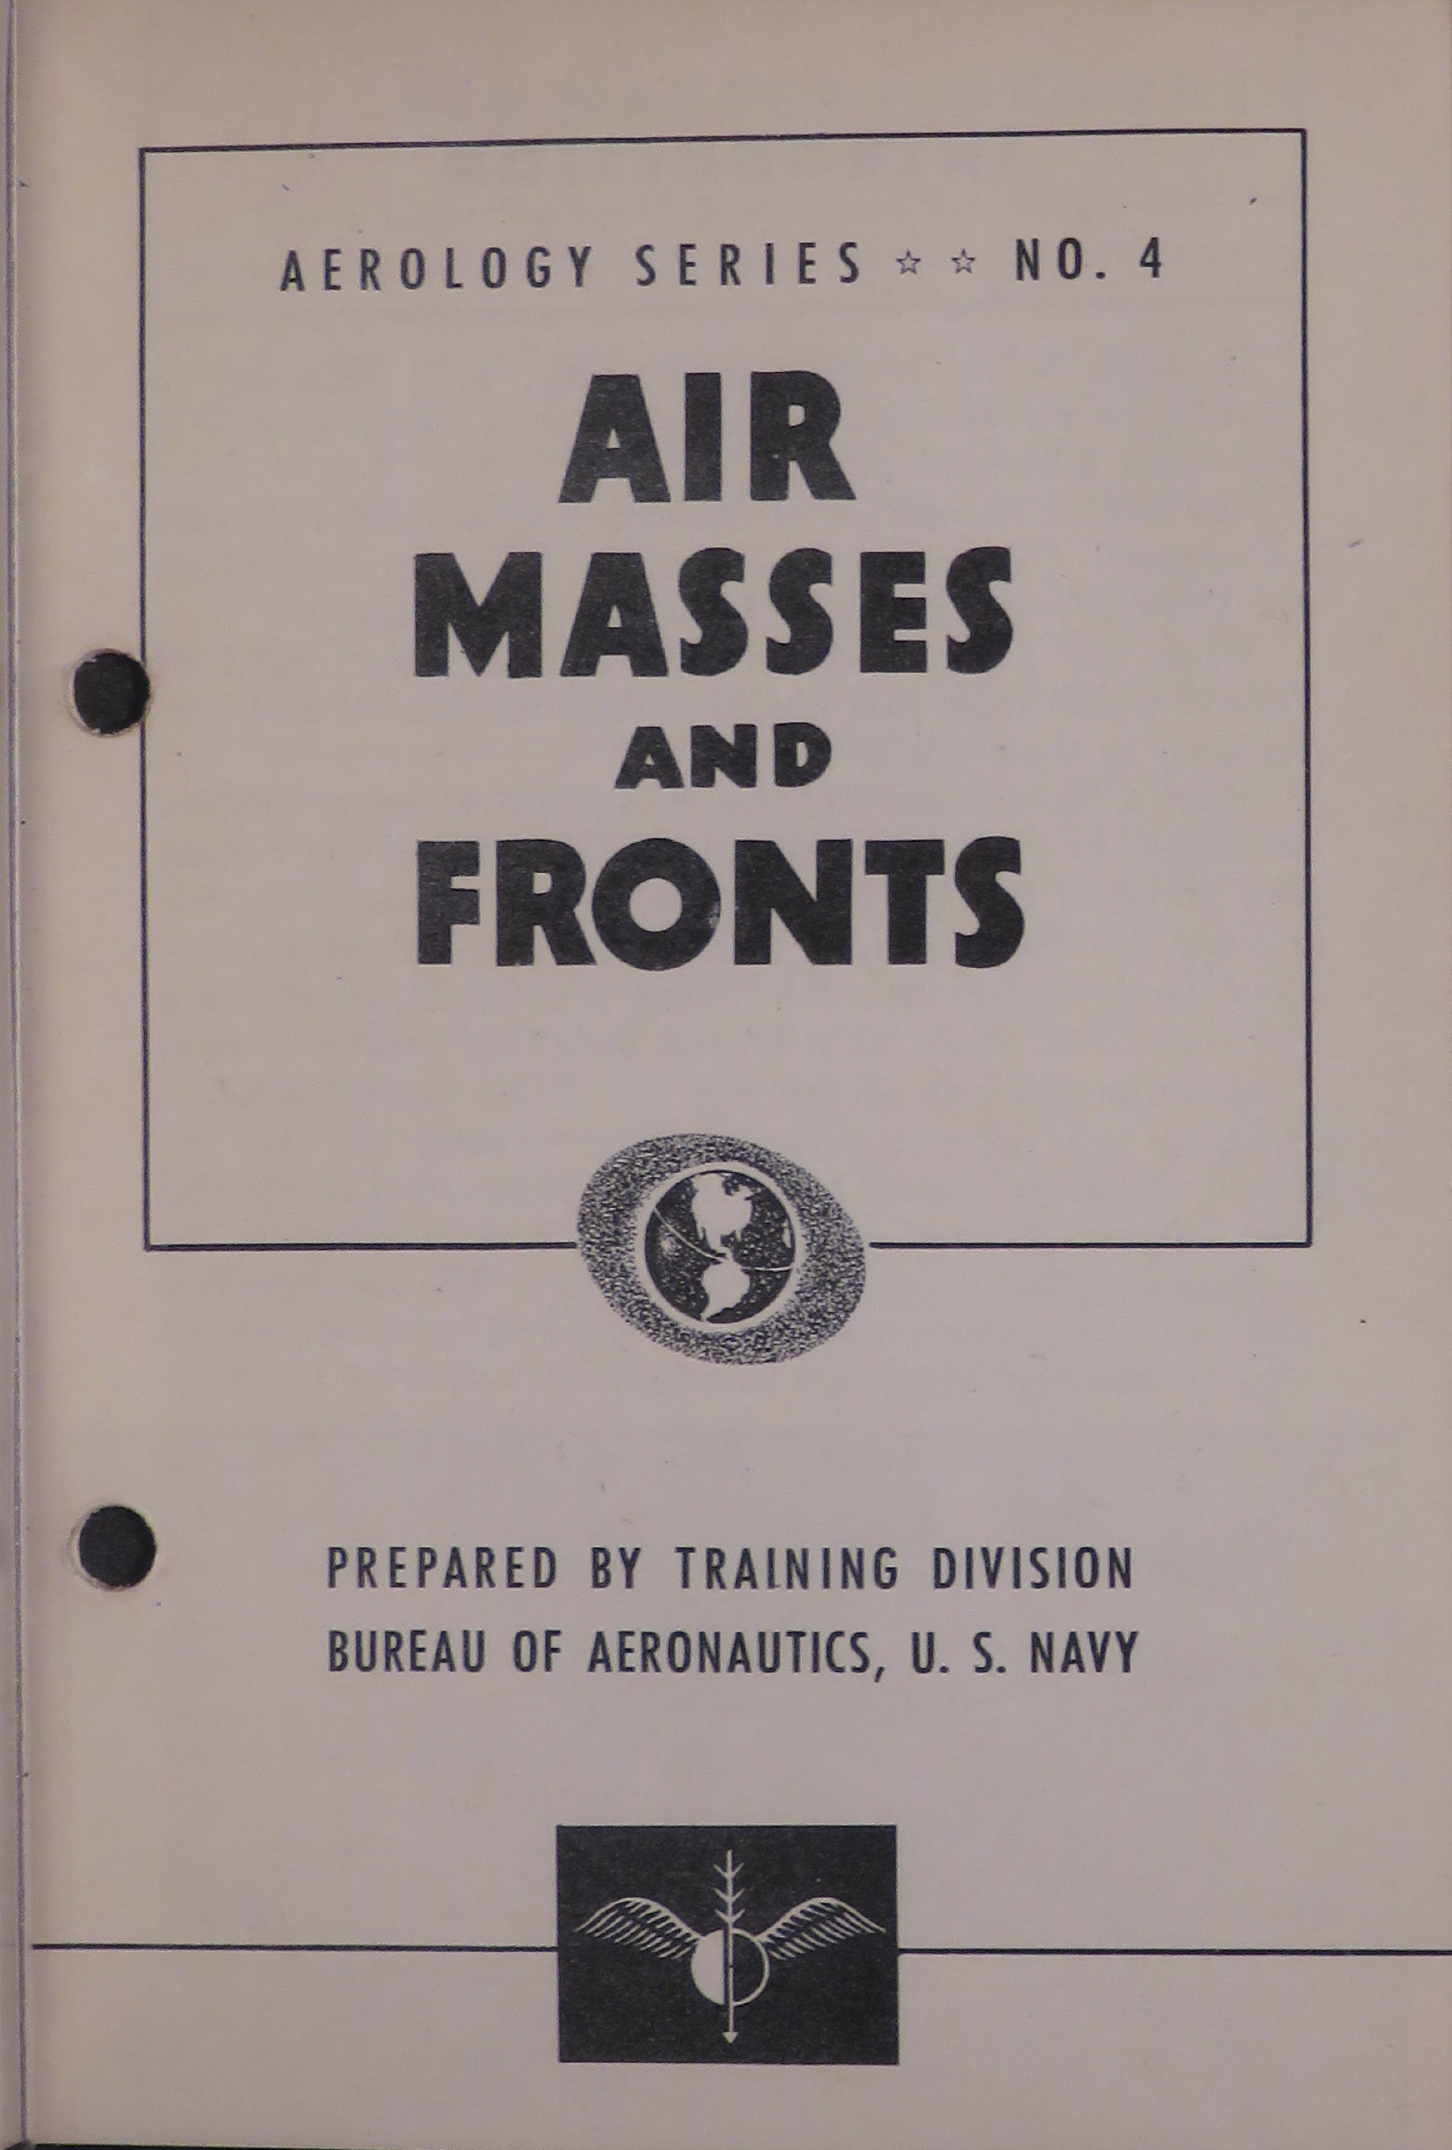 Sample page 3 from AirCorps Library document: Aerology Series No. 4; Air Masses and Fronts